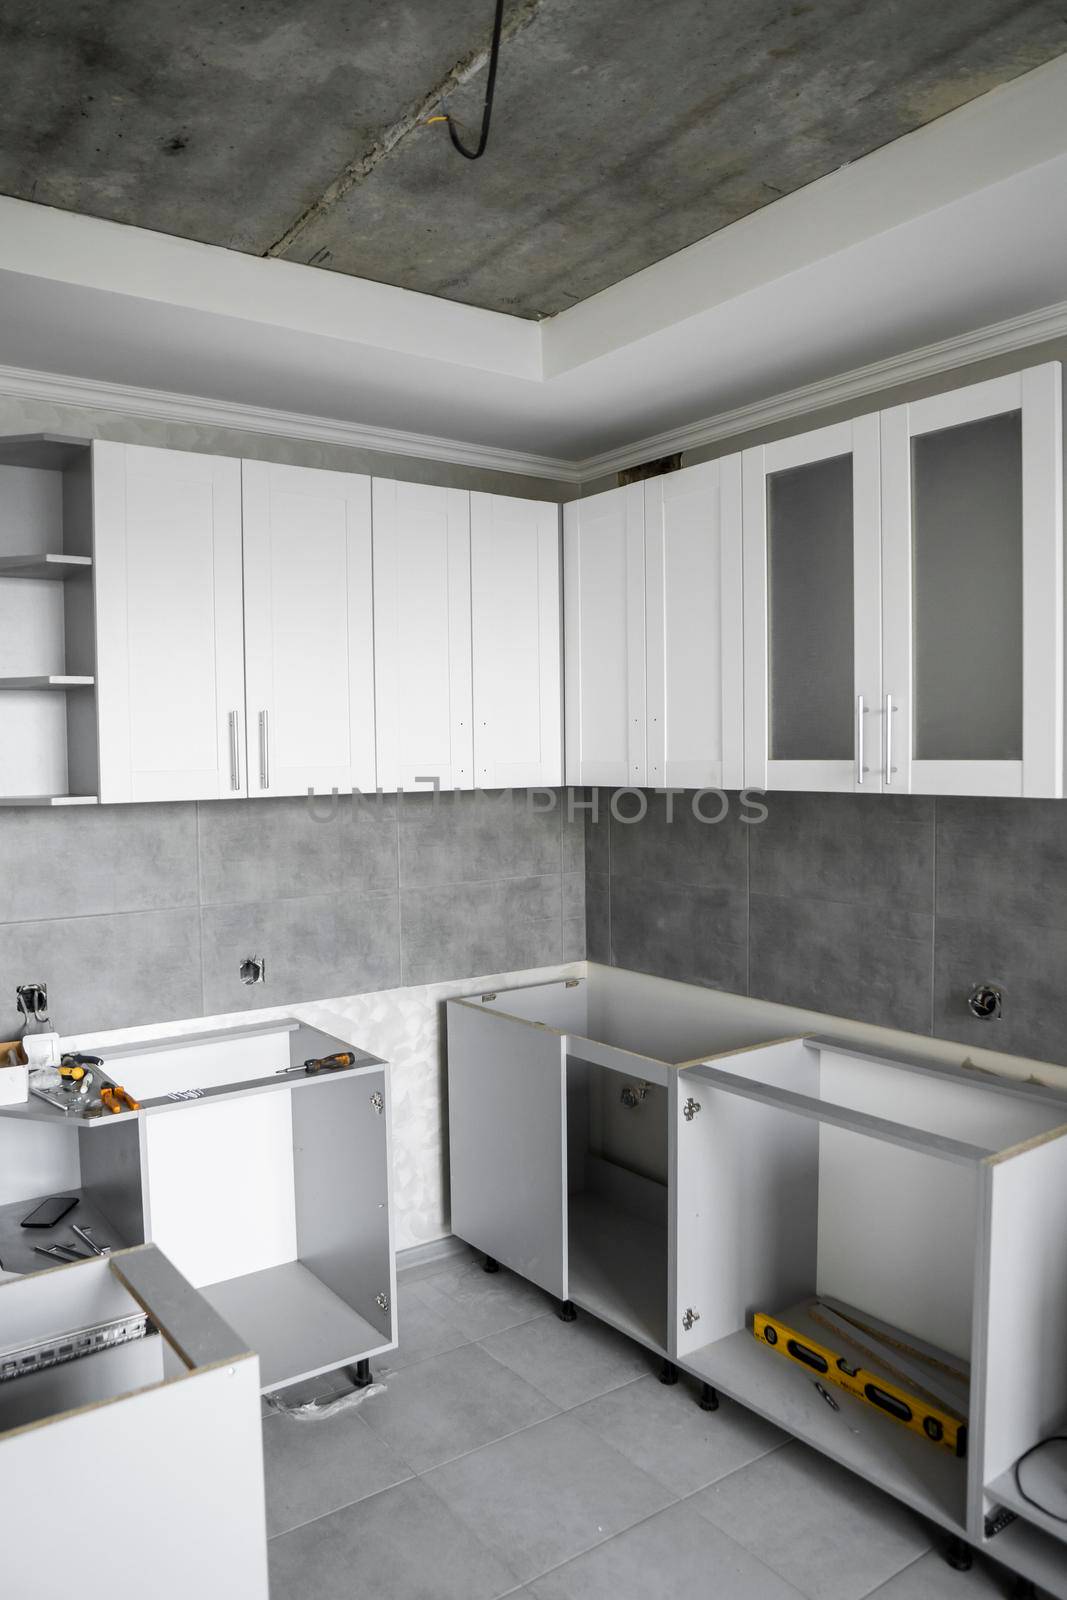 Custom kitchen cabinets installation with a furniture facades mdf. Gray modular kitchen from chipboard material on a various stages of installation. A frame furniture fronts mdf profile. by vovsht